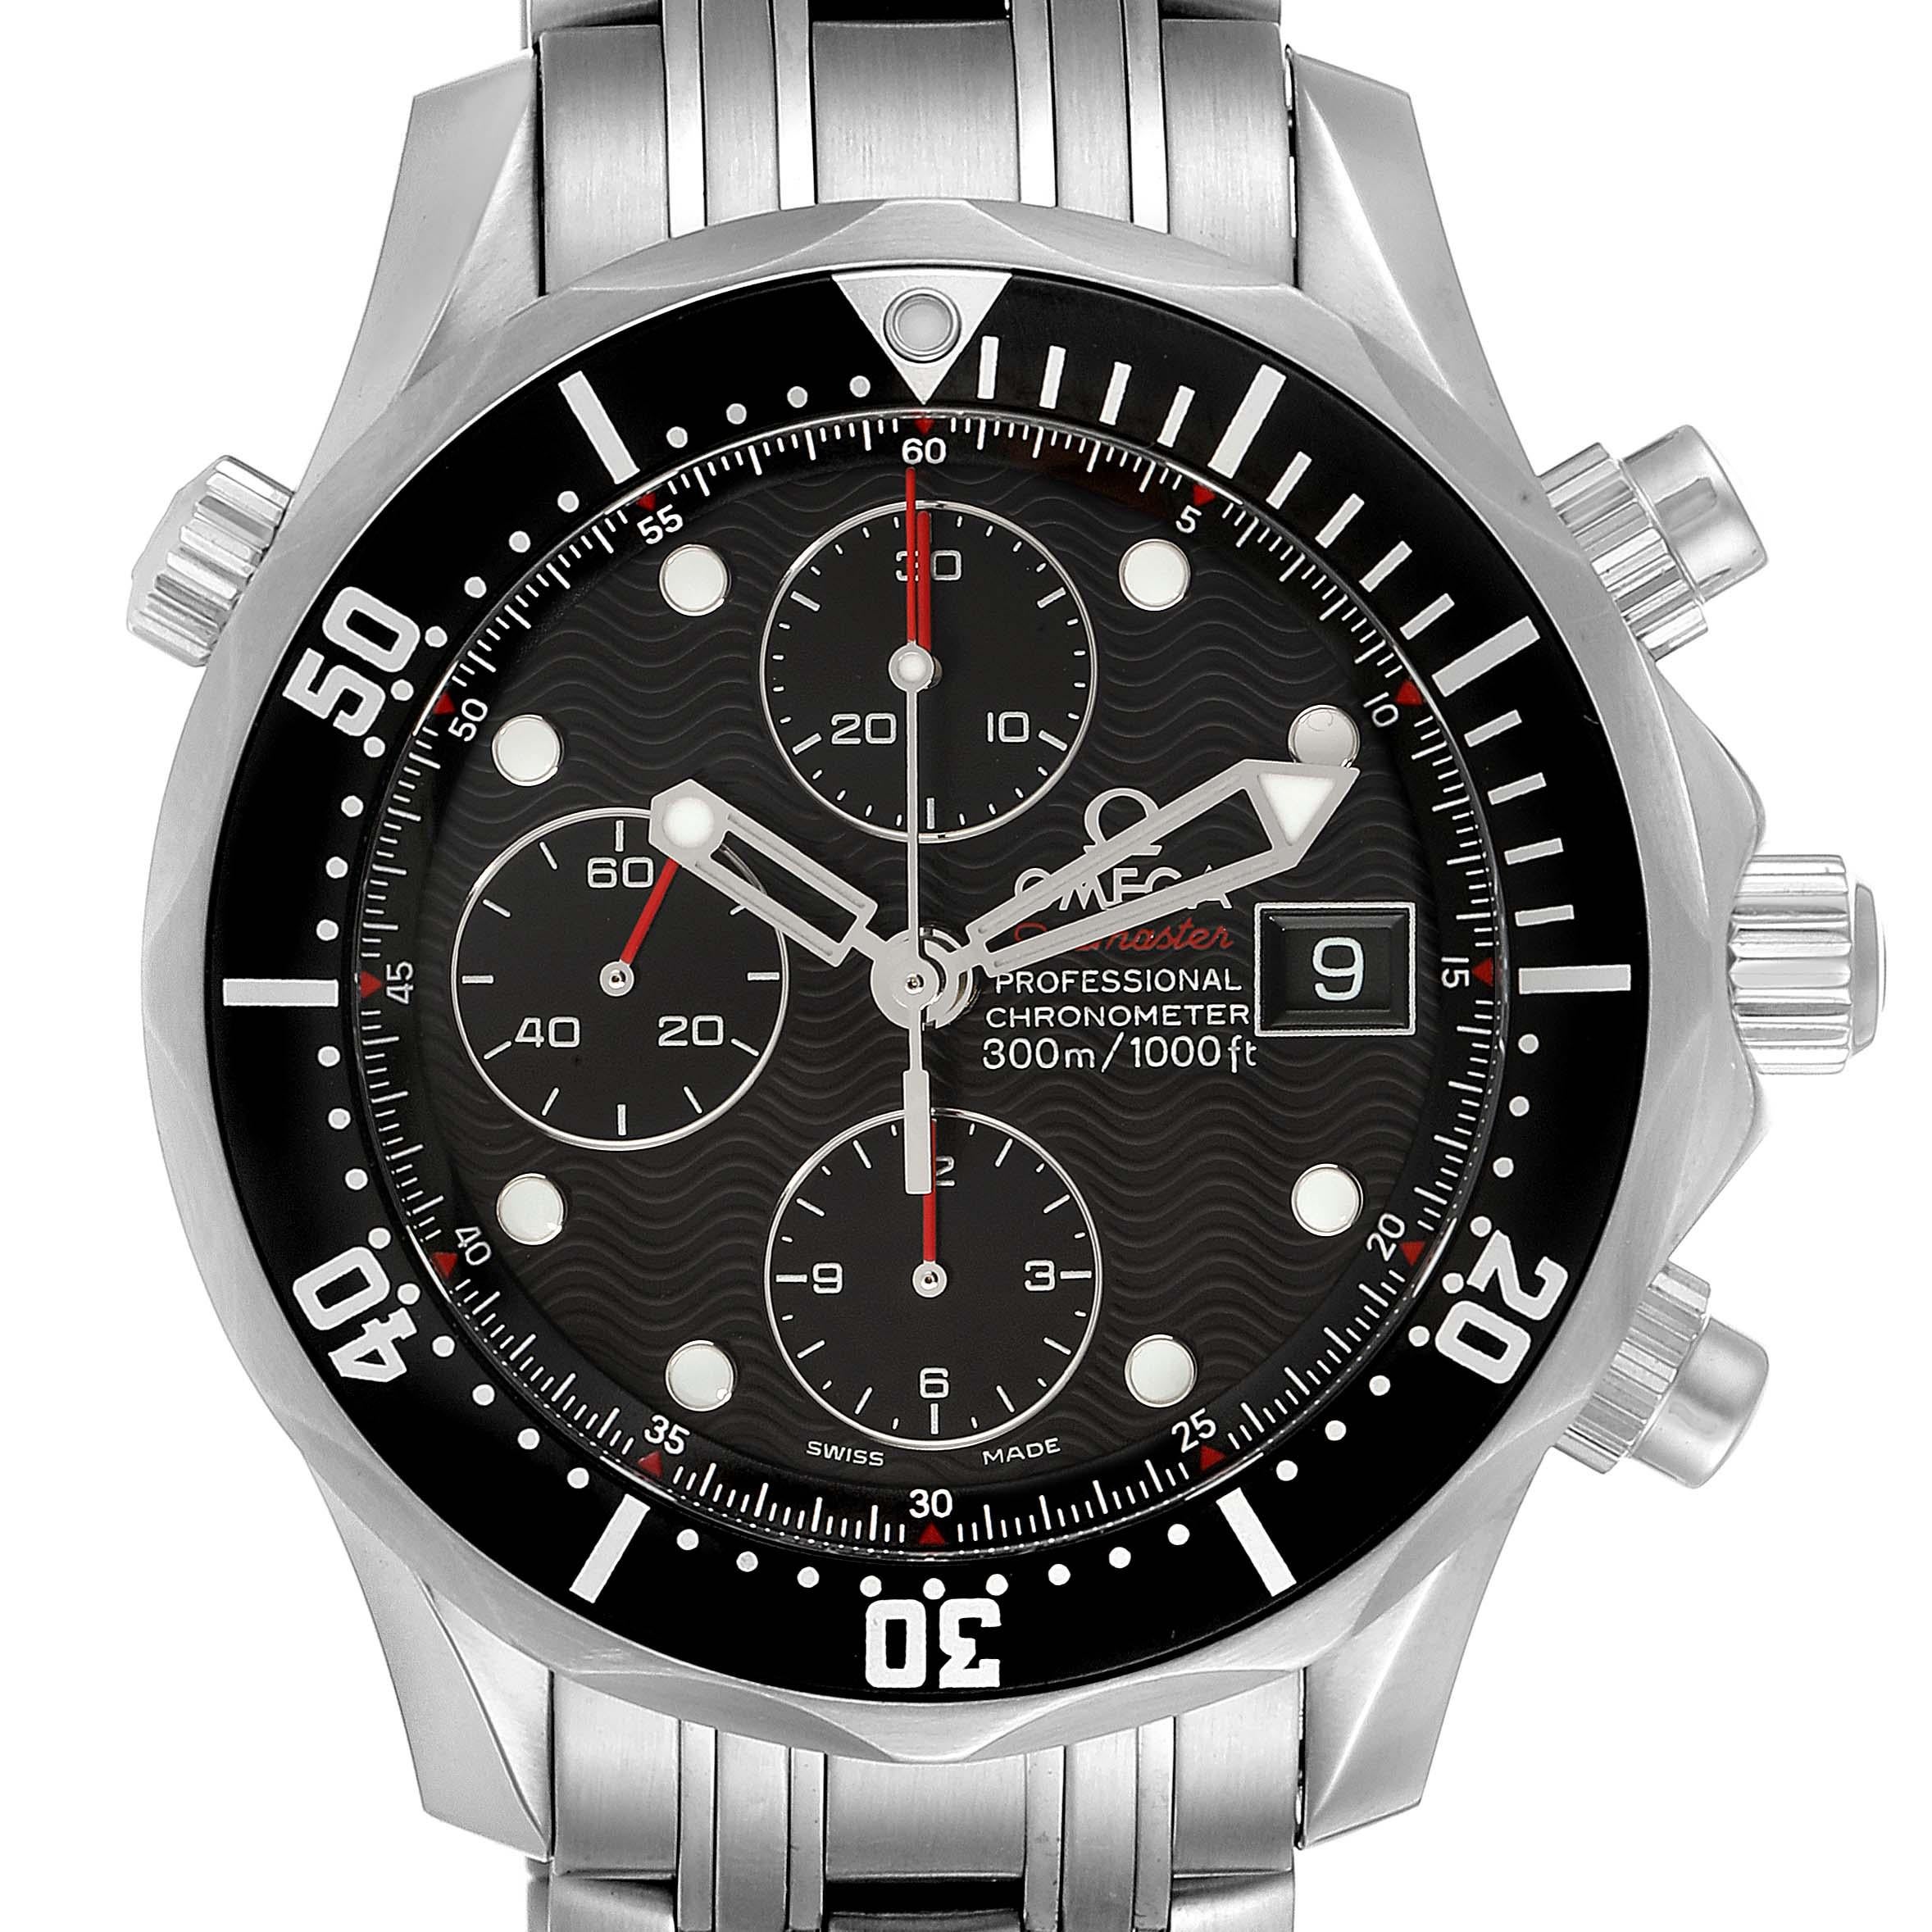 Omega Seamaster 300M Chronograph Black Dial Watch 213.30.42.40.01.001. Automatic self-winding chronograph movement. Stainless steel round case 41.0 mm in diameter. Black unidirectional rotating bezel. Scratch resistant sapphire crystal. Black dial